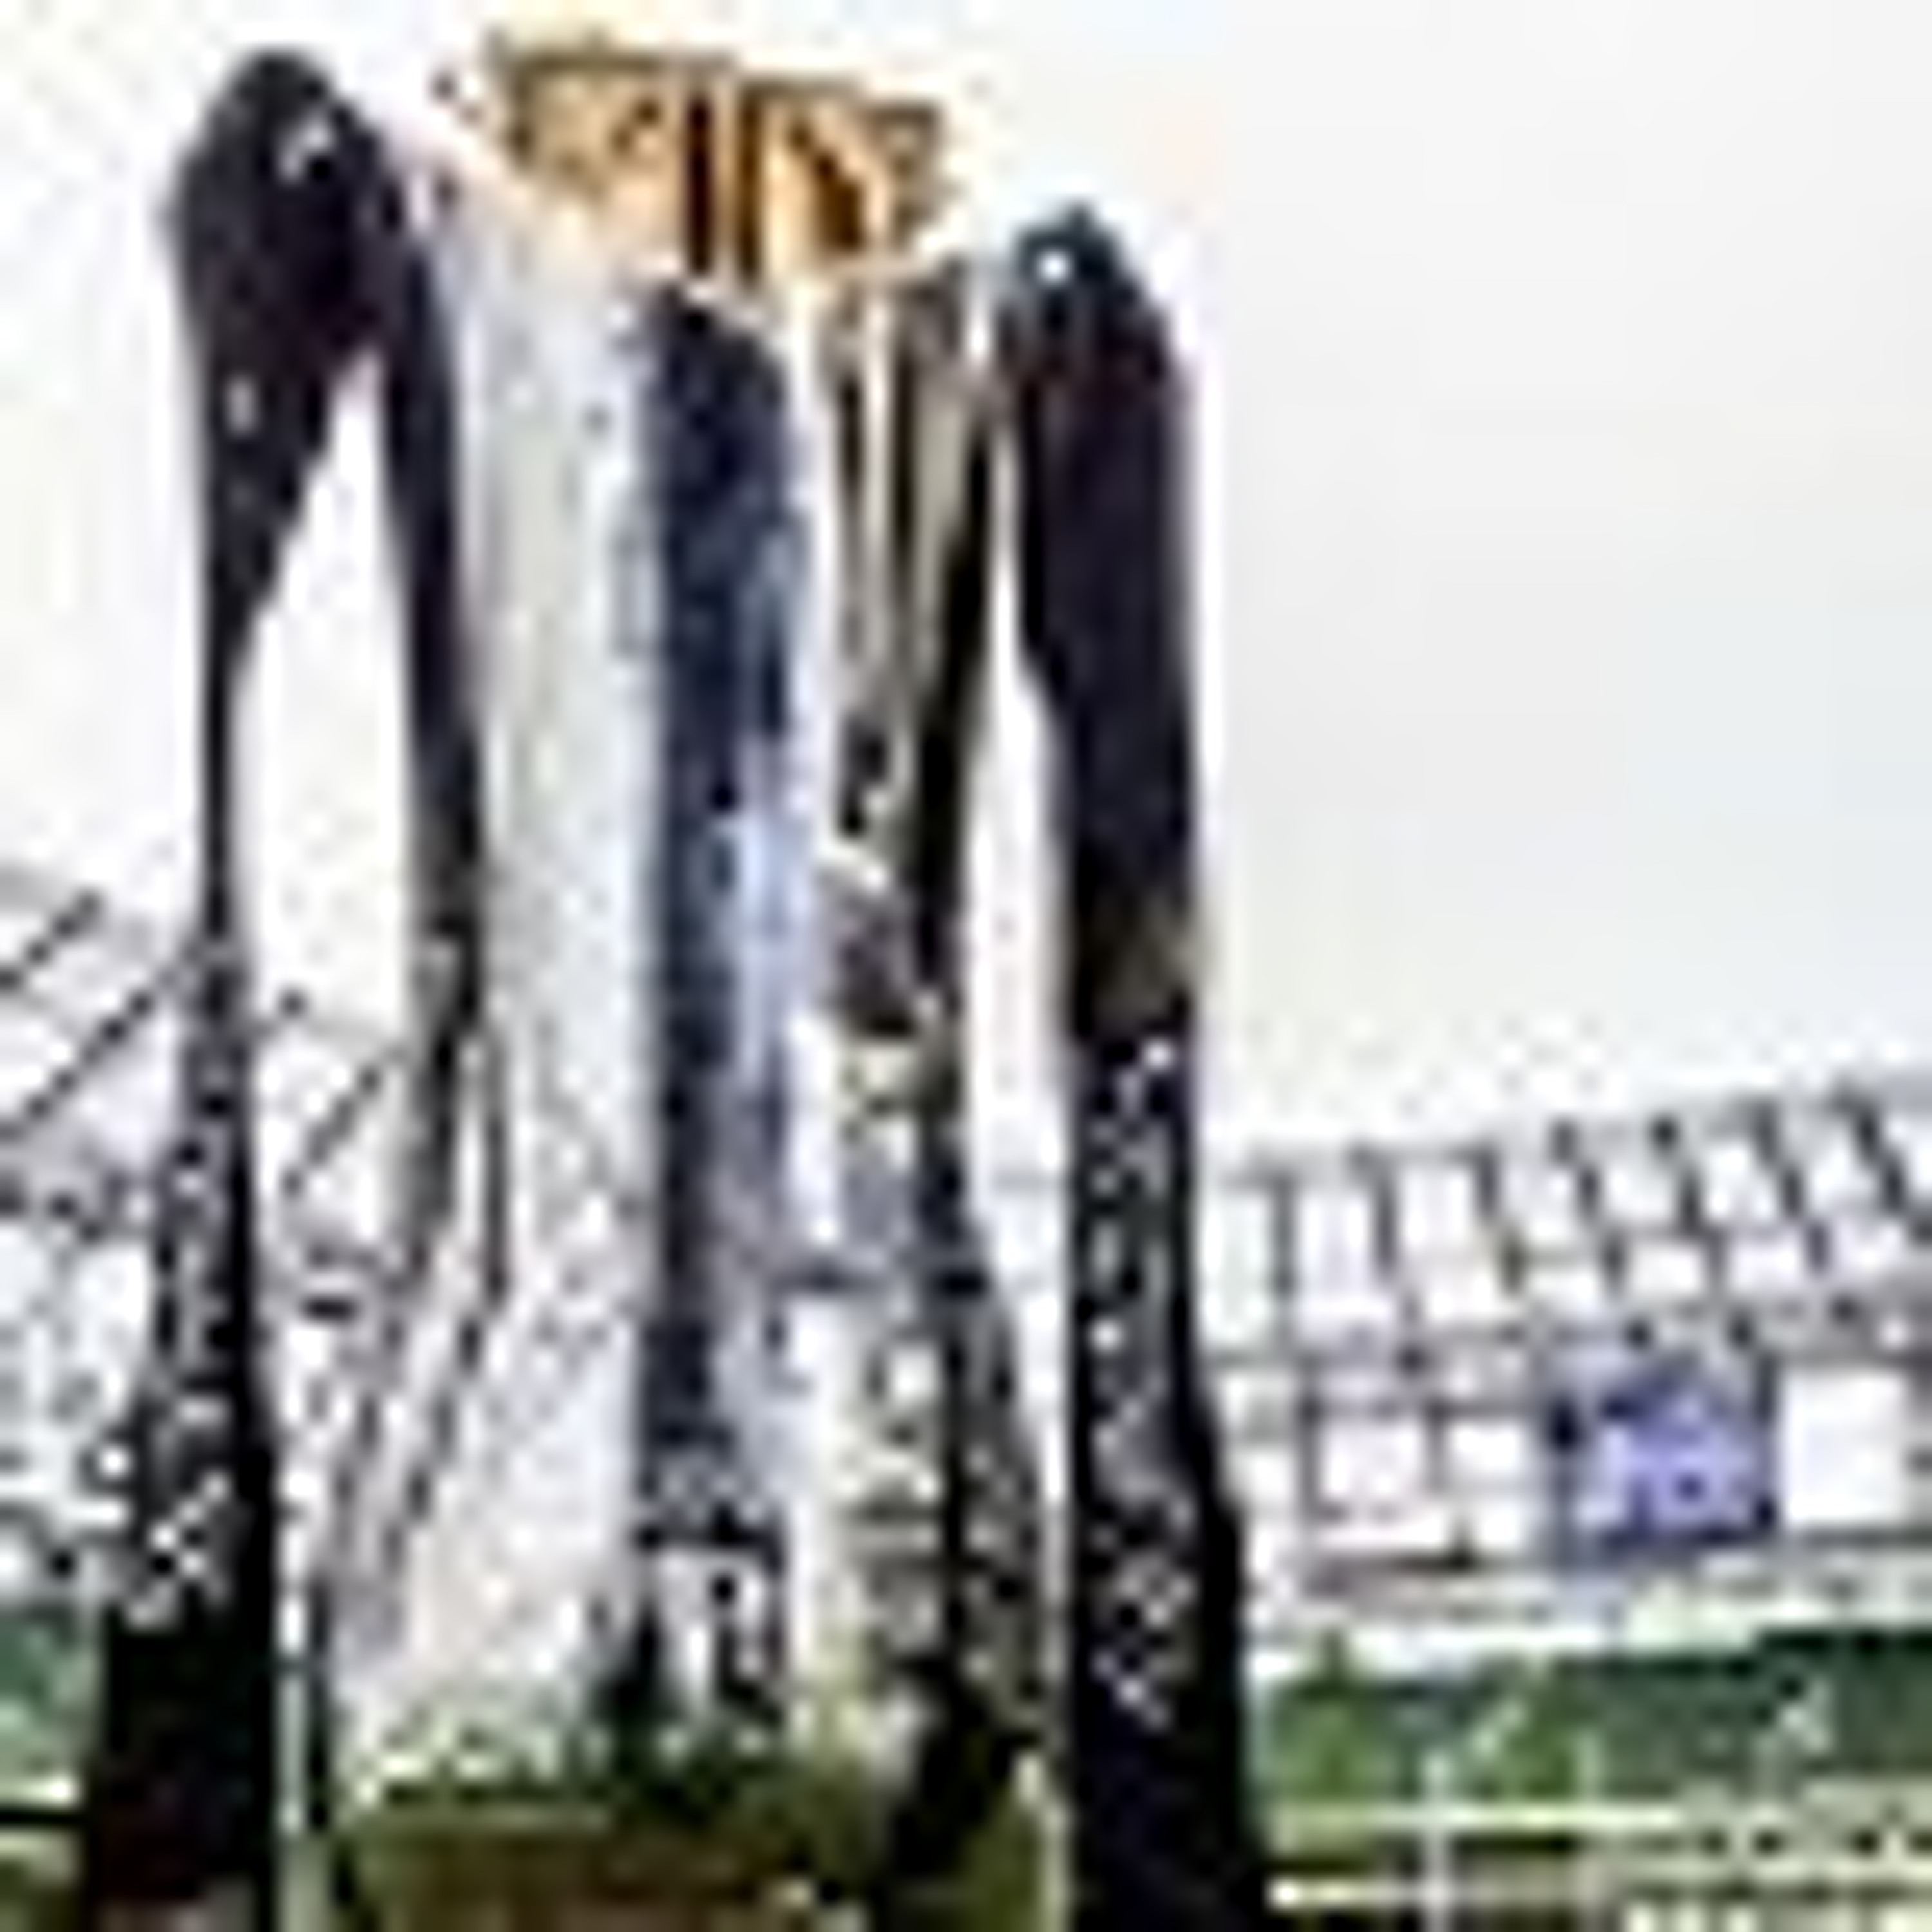 The Brave New World of PRO14 Rugby - Craggy Rugby Podcast